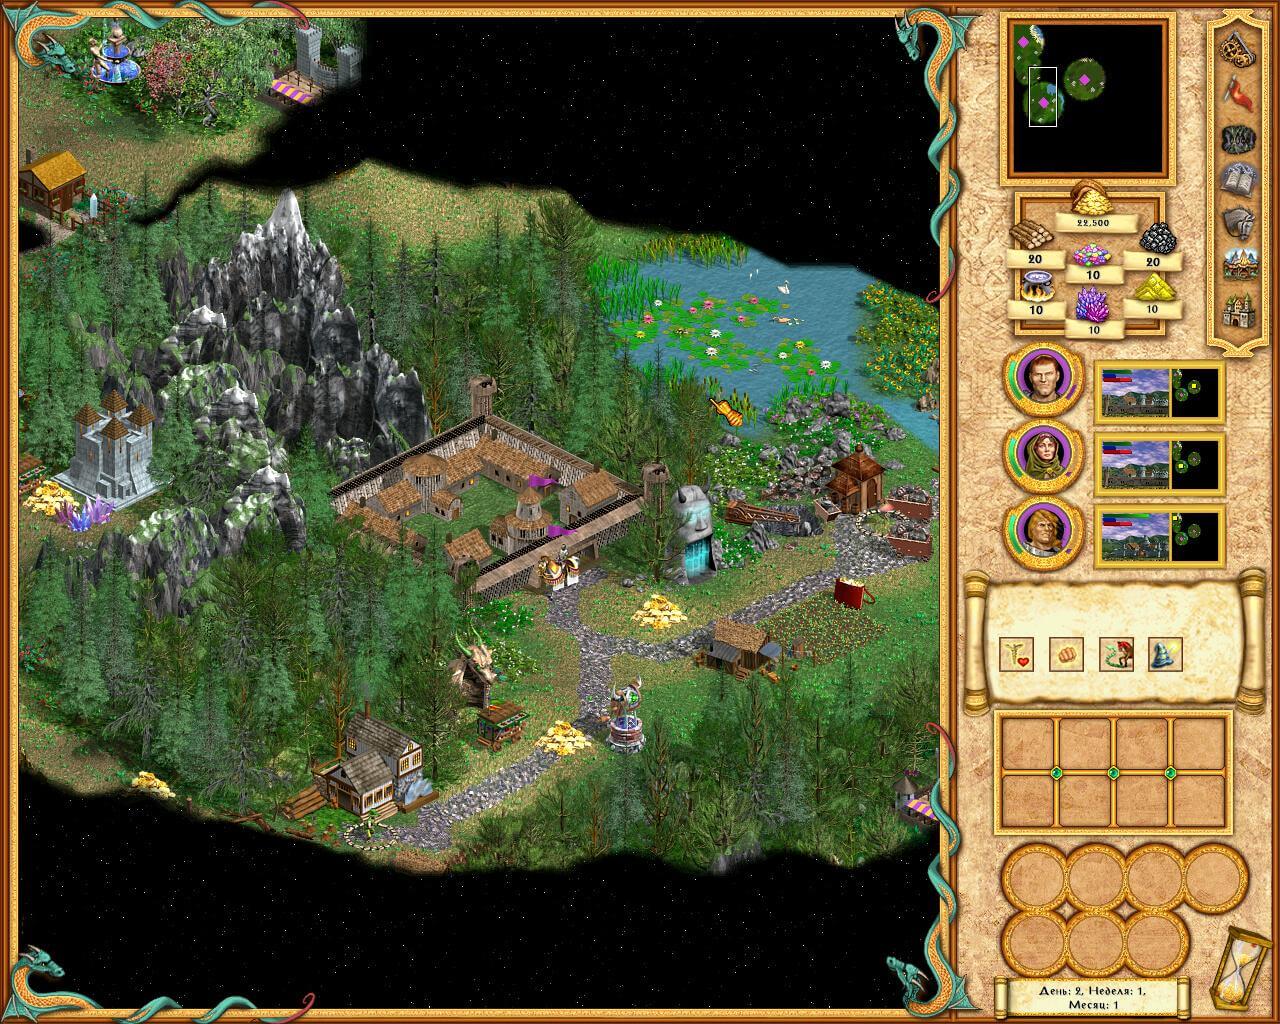 heroes of might and magic 3 download fee